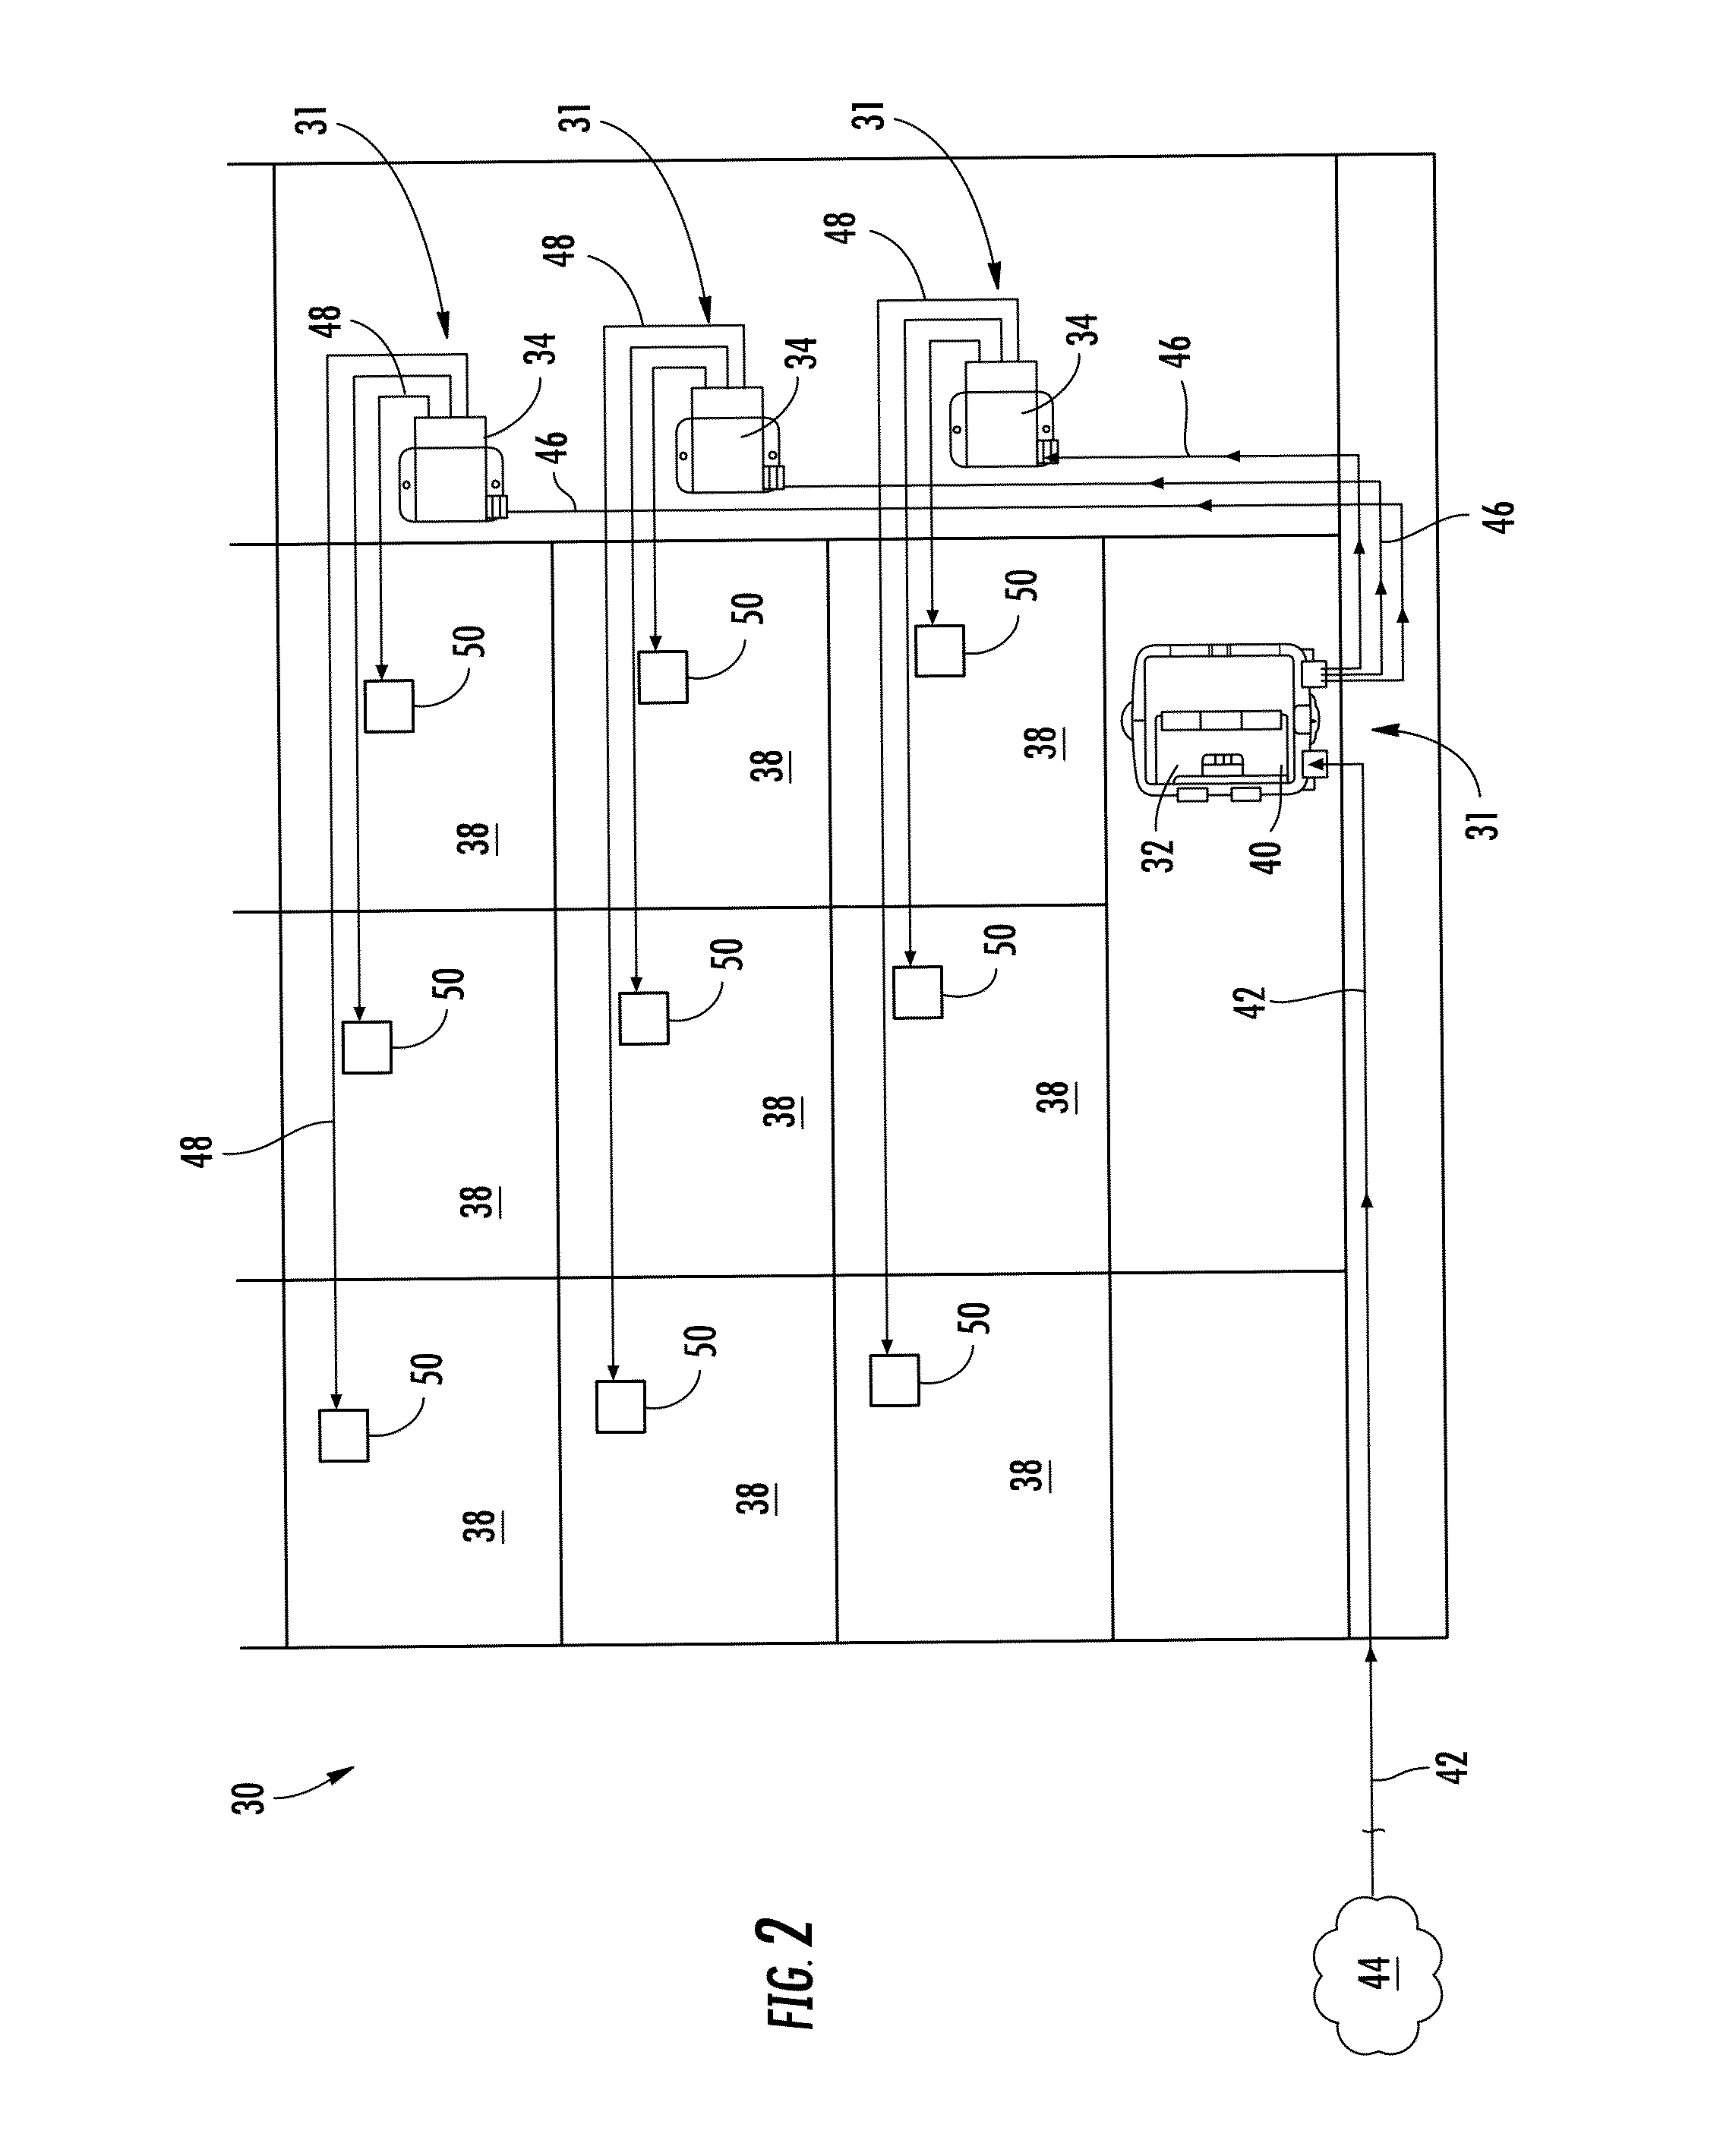 Fiber optic terminals, systems, and methods for network service management